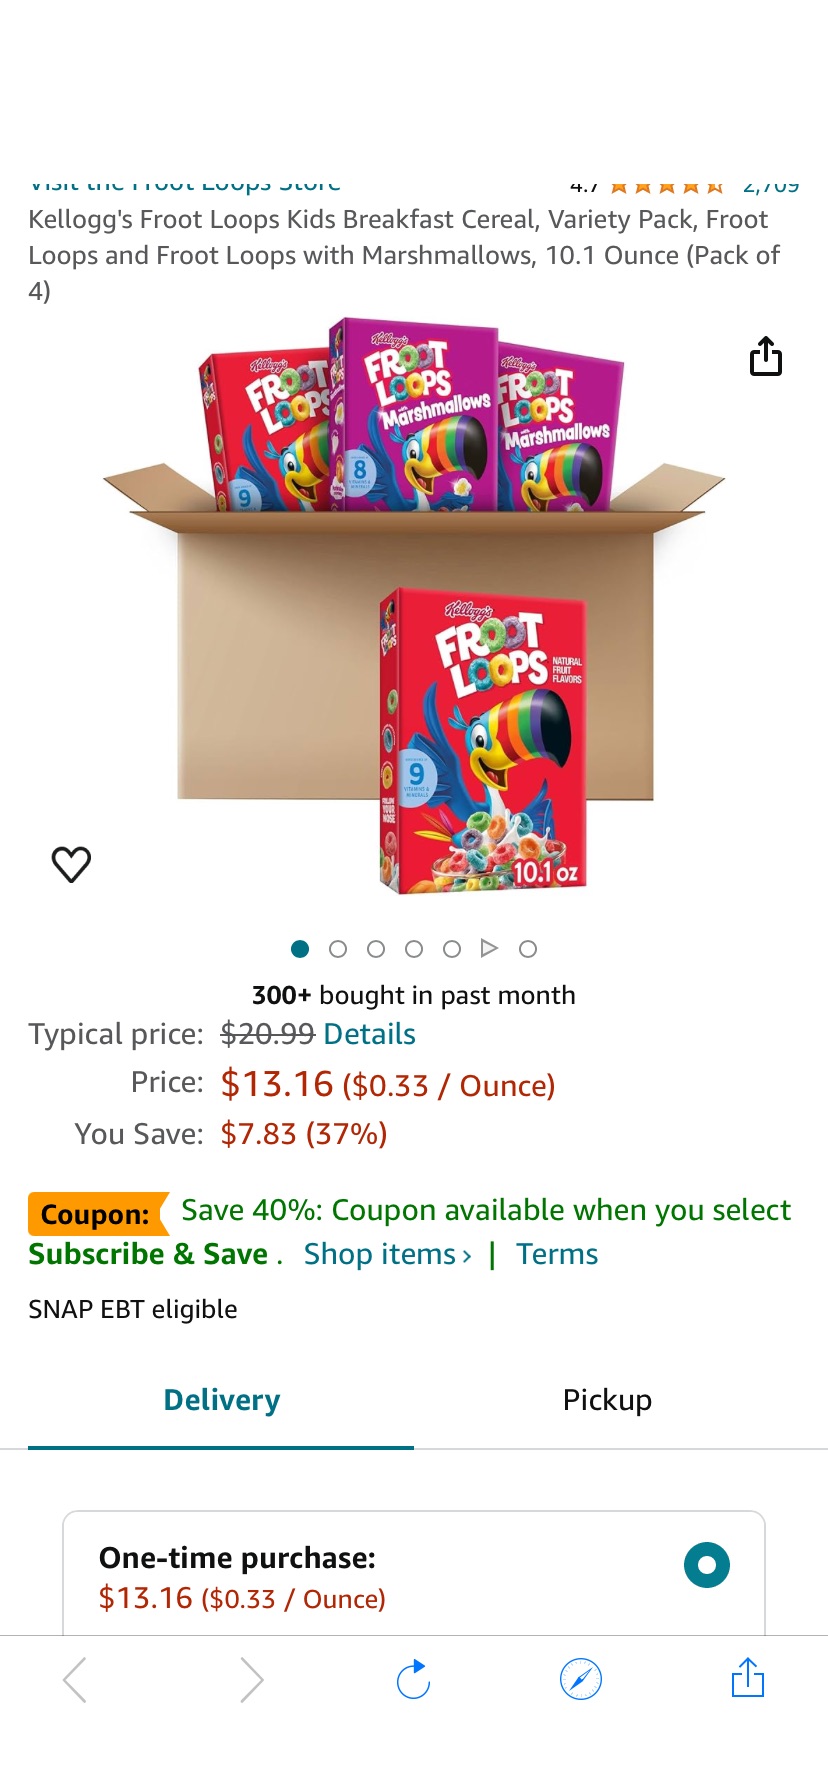 Amazon.com: Kellogg's Froot Loops Kids Breakfast Cereal, Variety Pack, Froot Loops and Froot Loops with Marshmallows, 10.1 Ounce (Pack of 4)